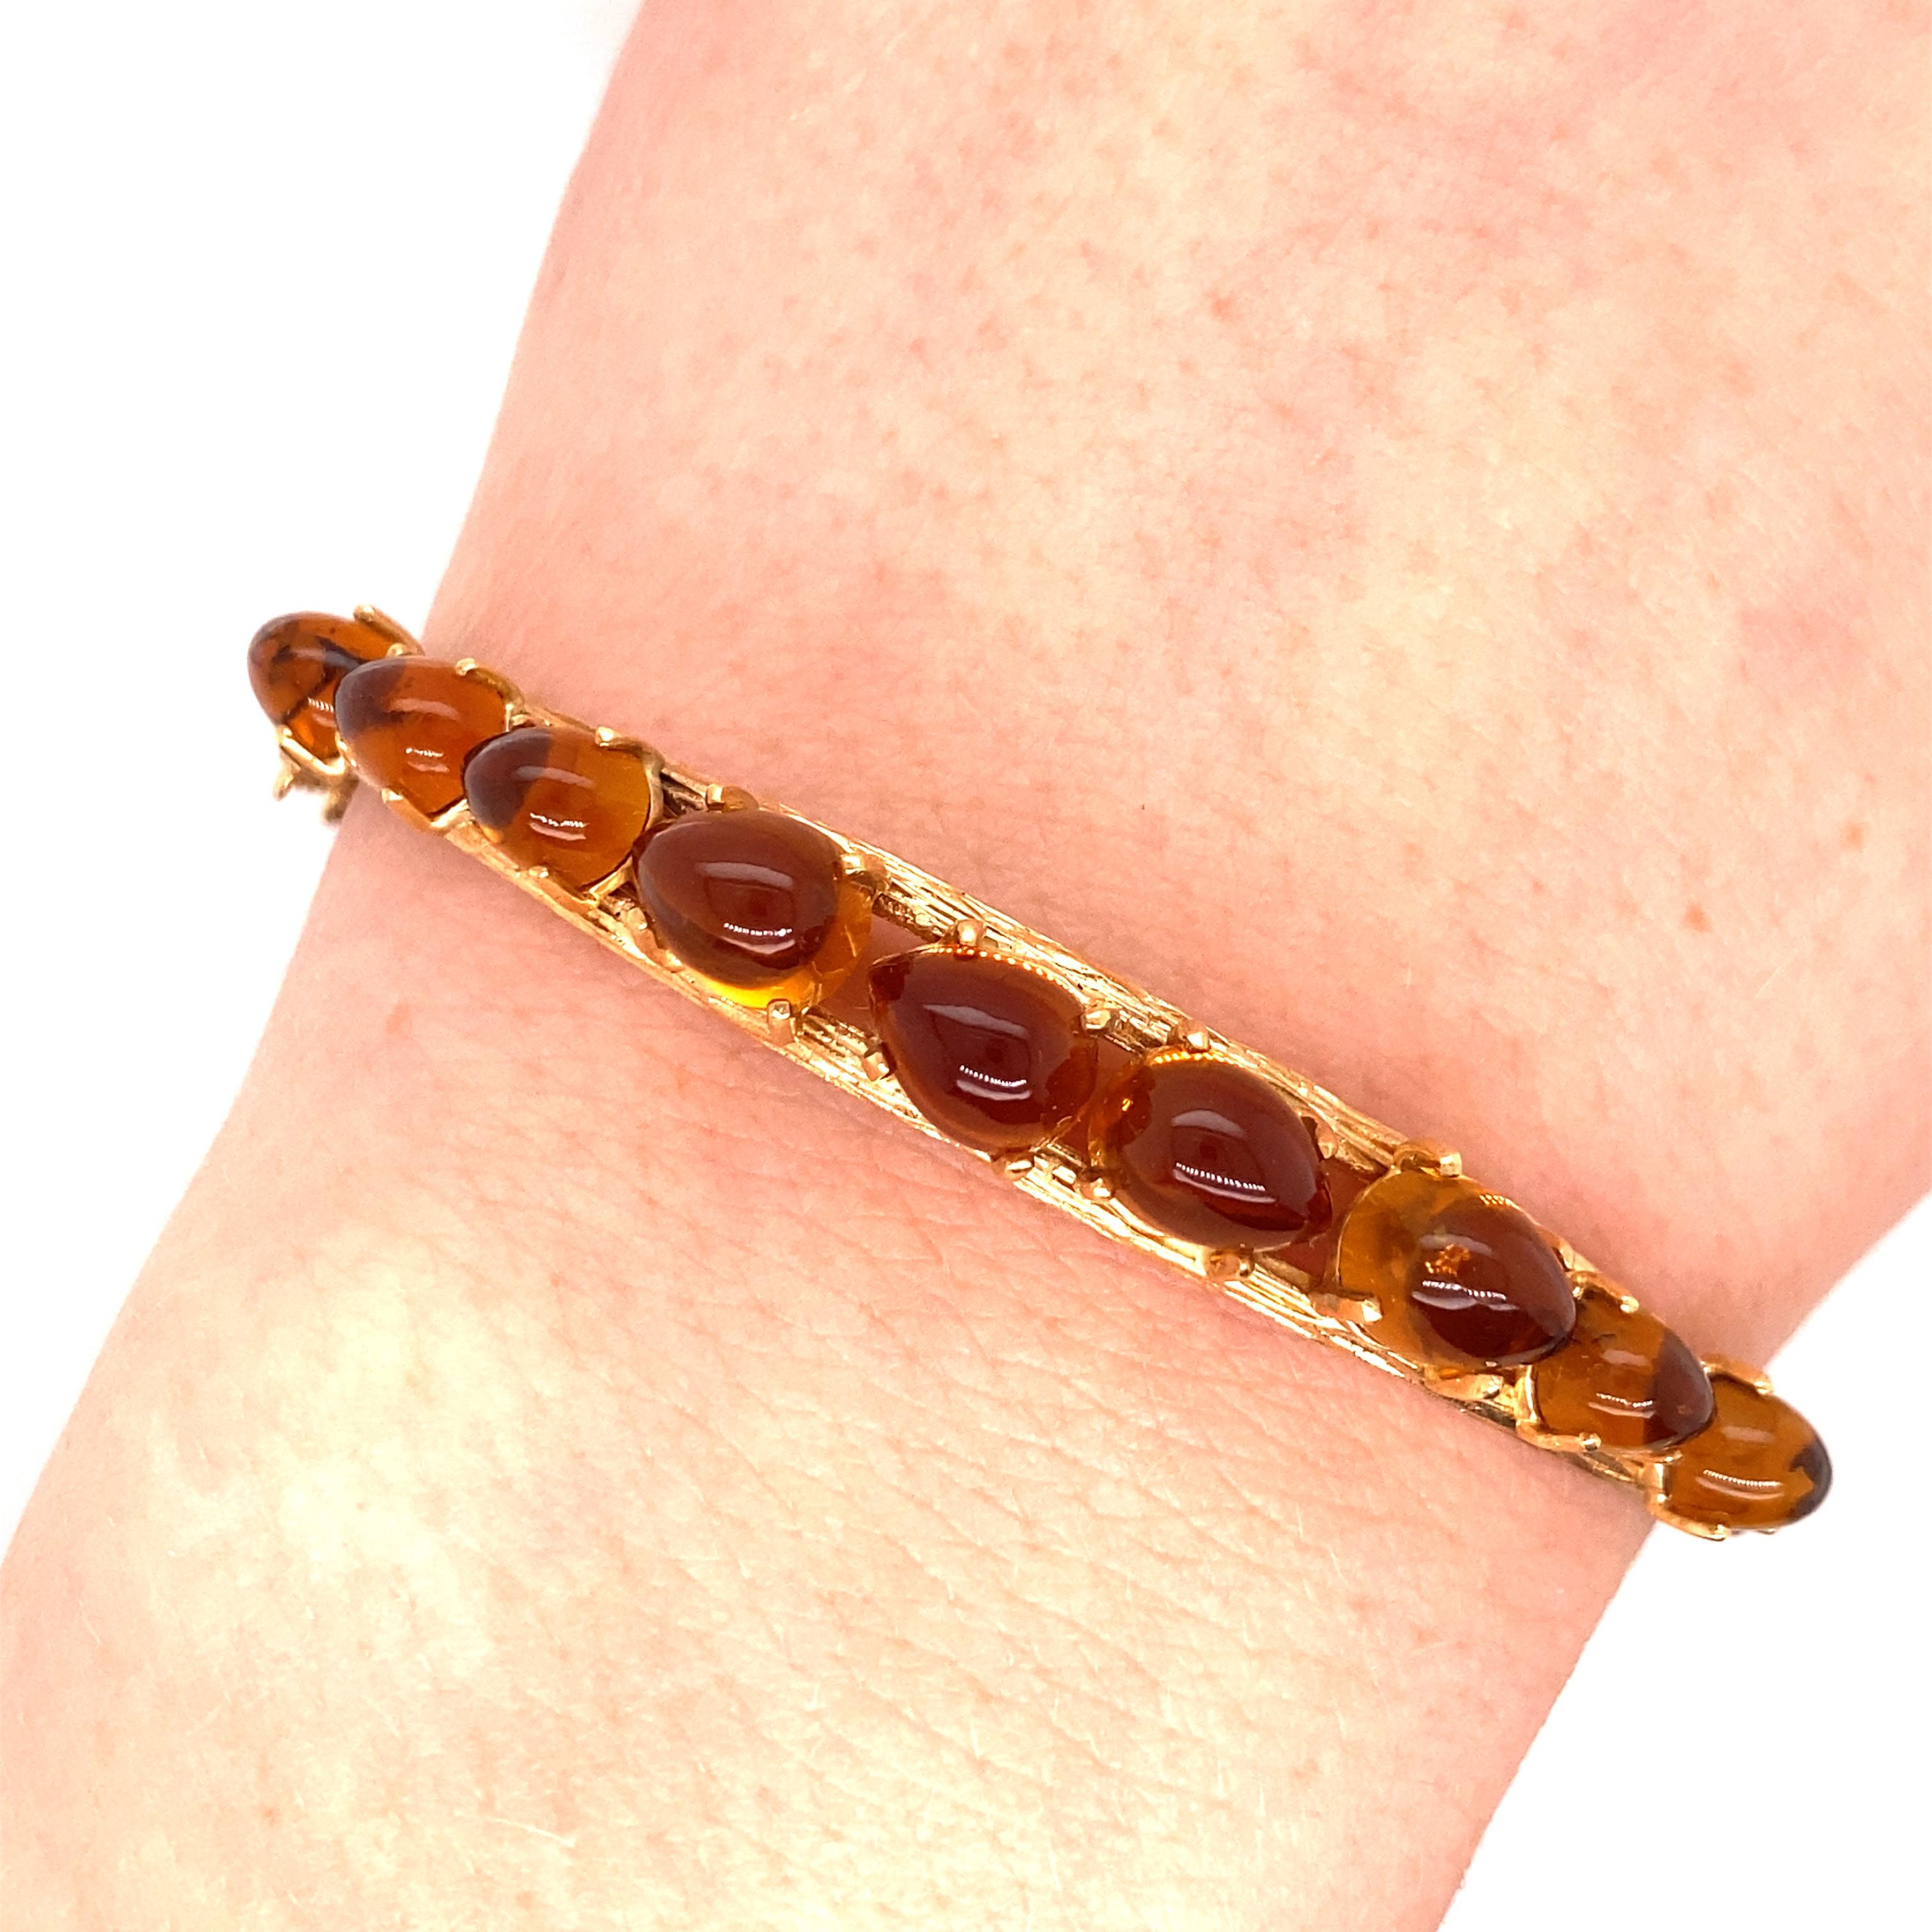 Vintage 14K Yellow Gold Amber Bangle Bracelet - The bangle has 9 cabochon pear shape Amber stones graduated in size and they are set in 4 prong heads. The gold bangle has a natural texture and is .25 inches wide with a slight taper. The inside